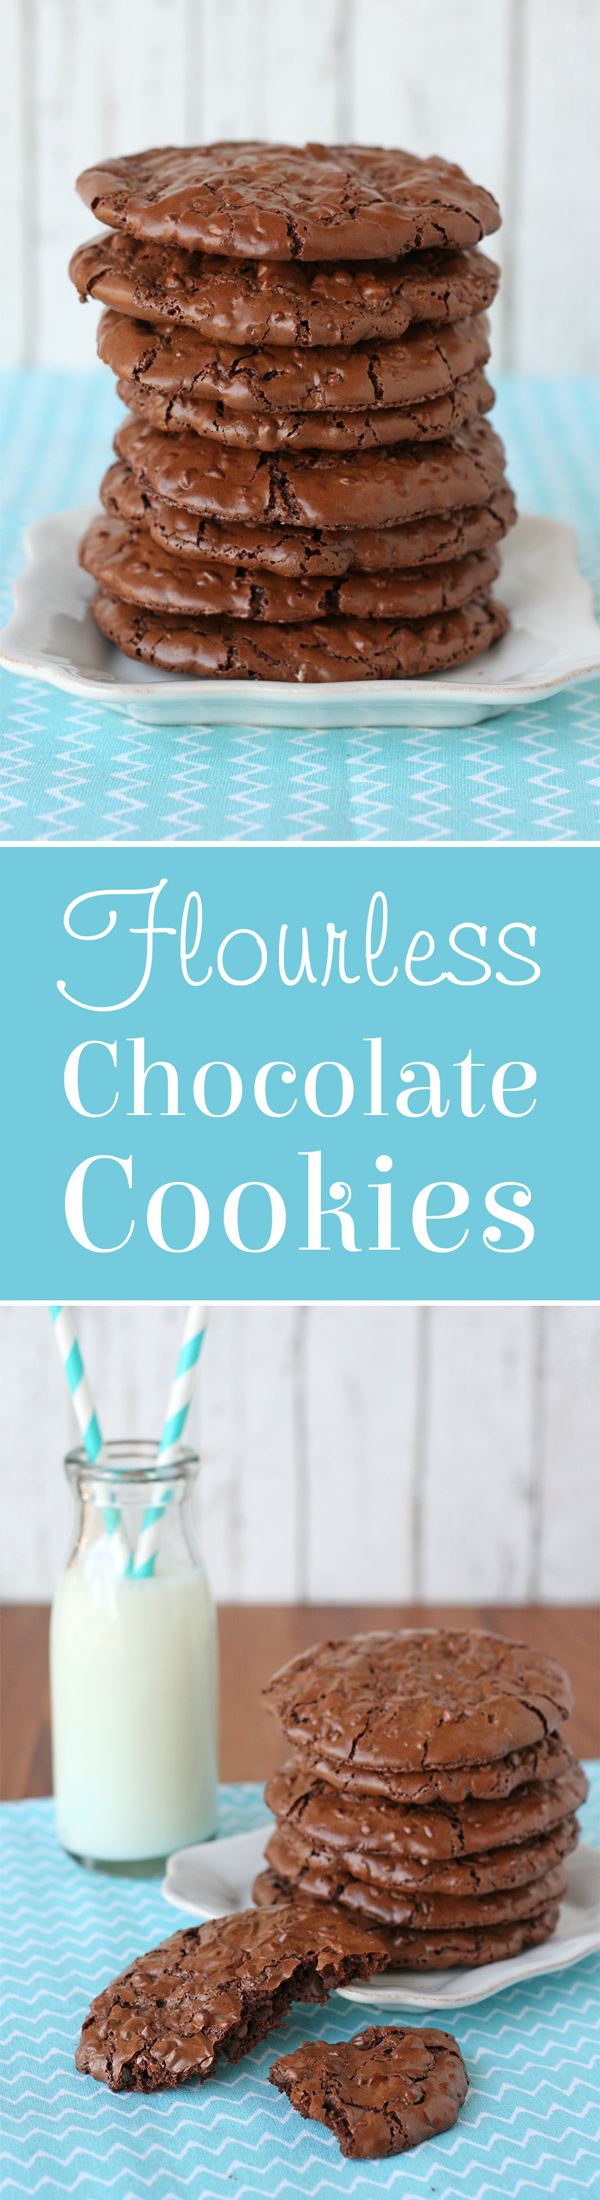 Chewy, delicious Flourless Chocolate Cookies